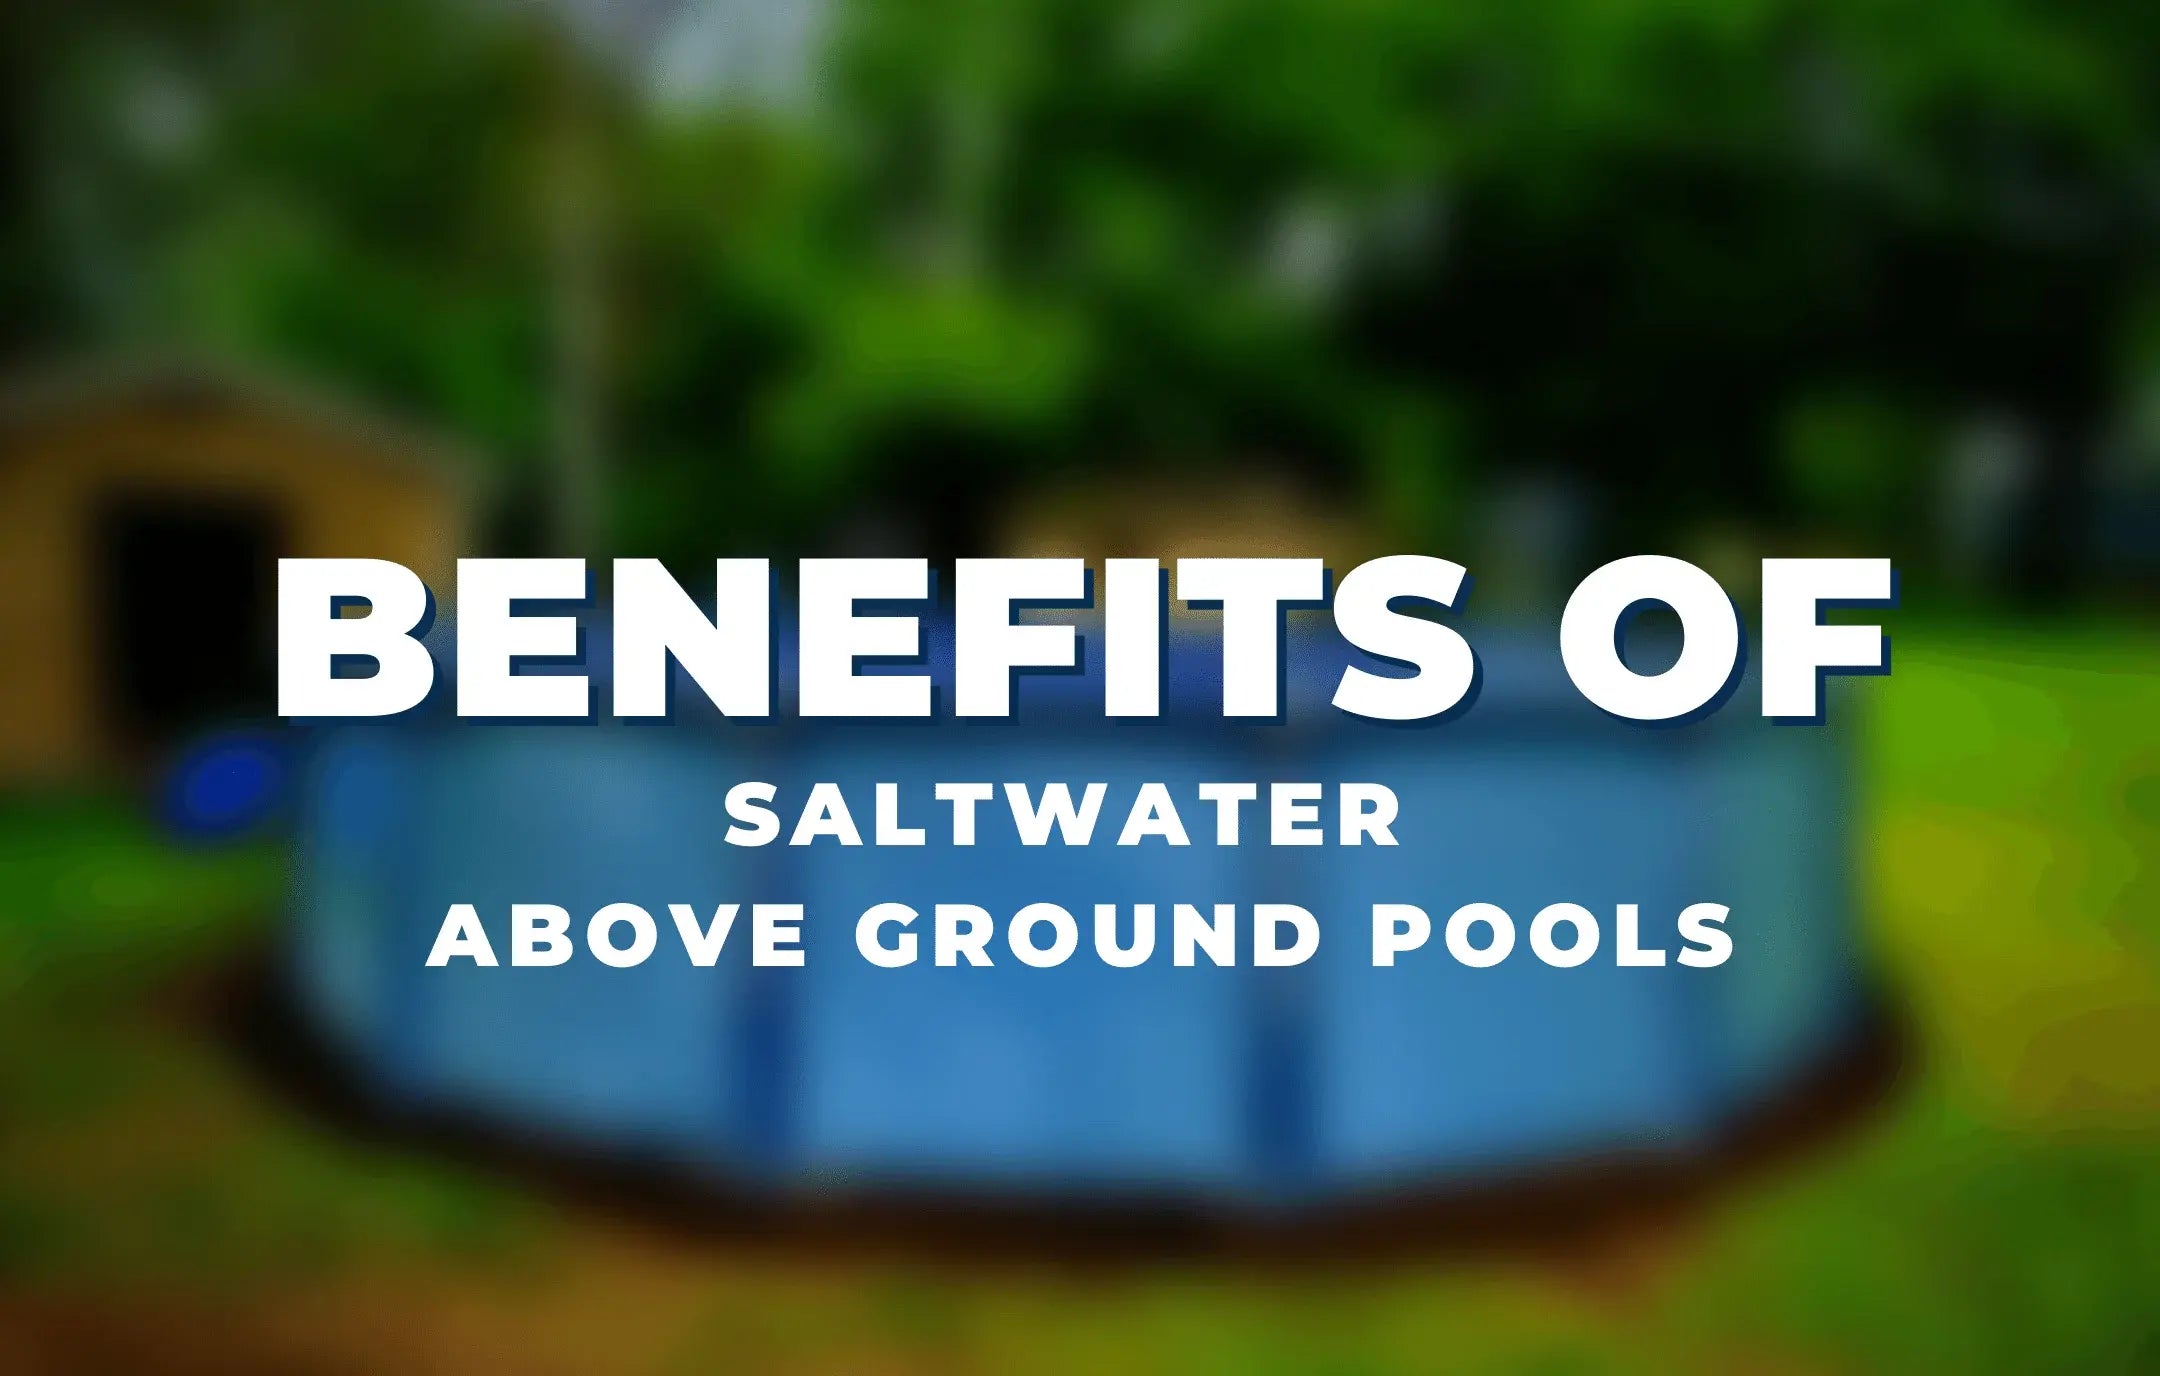 Benefits of Saltwater Above Ground Pools